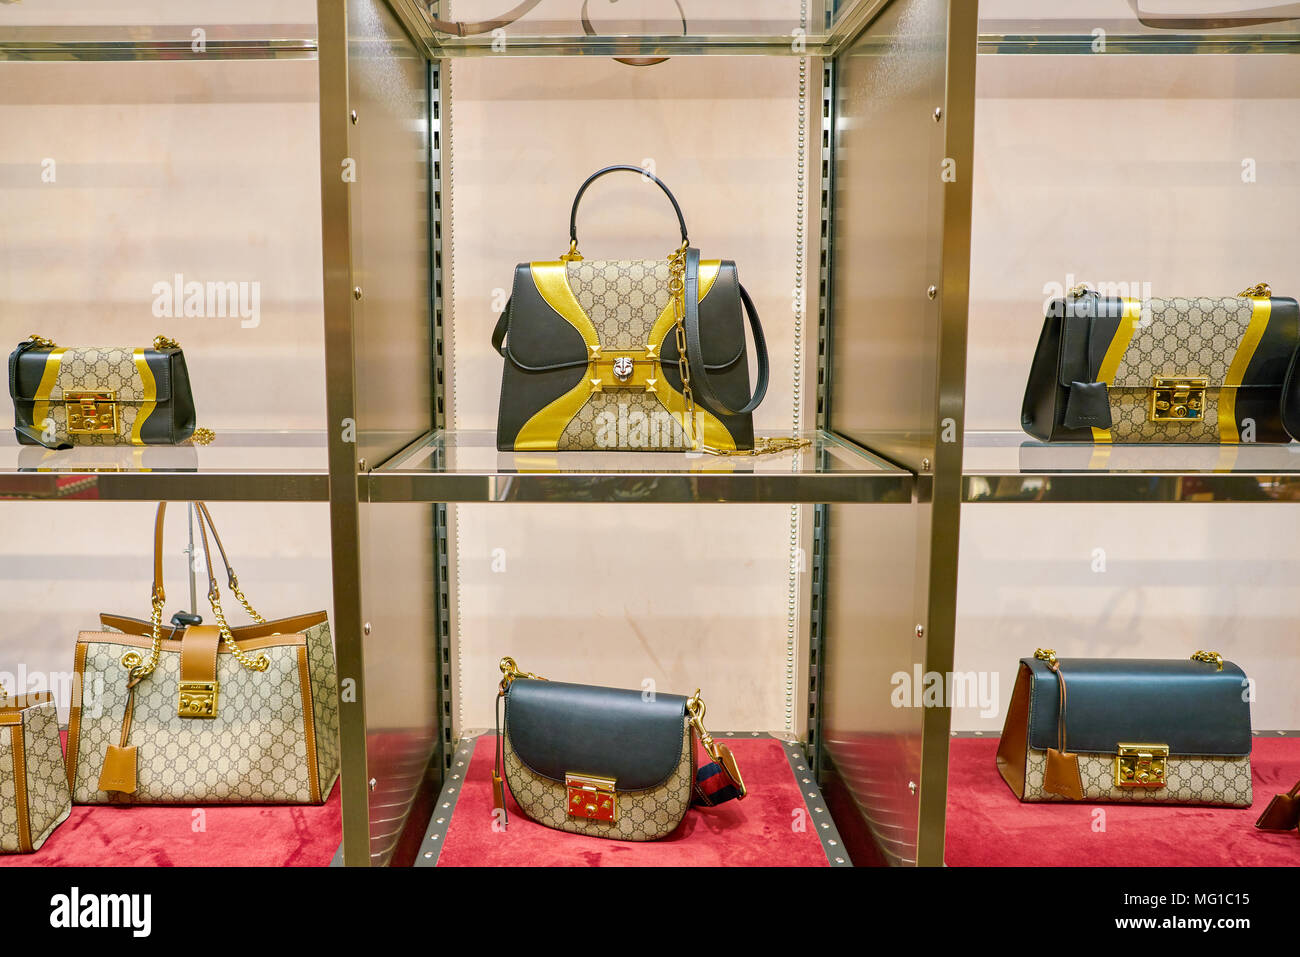 MILAN, ITALY - CIRCA NOVEMBER, 2017: Gucci bags on display at Rinascente.  Rinascente is a collection of high-end stores Stock Photo - Alamy